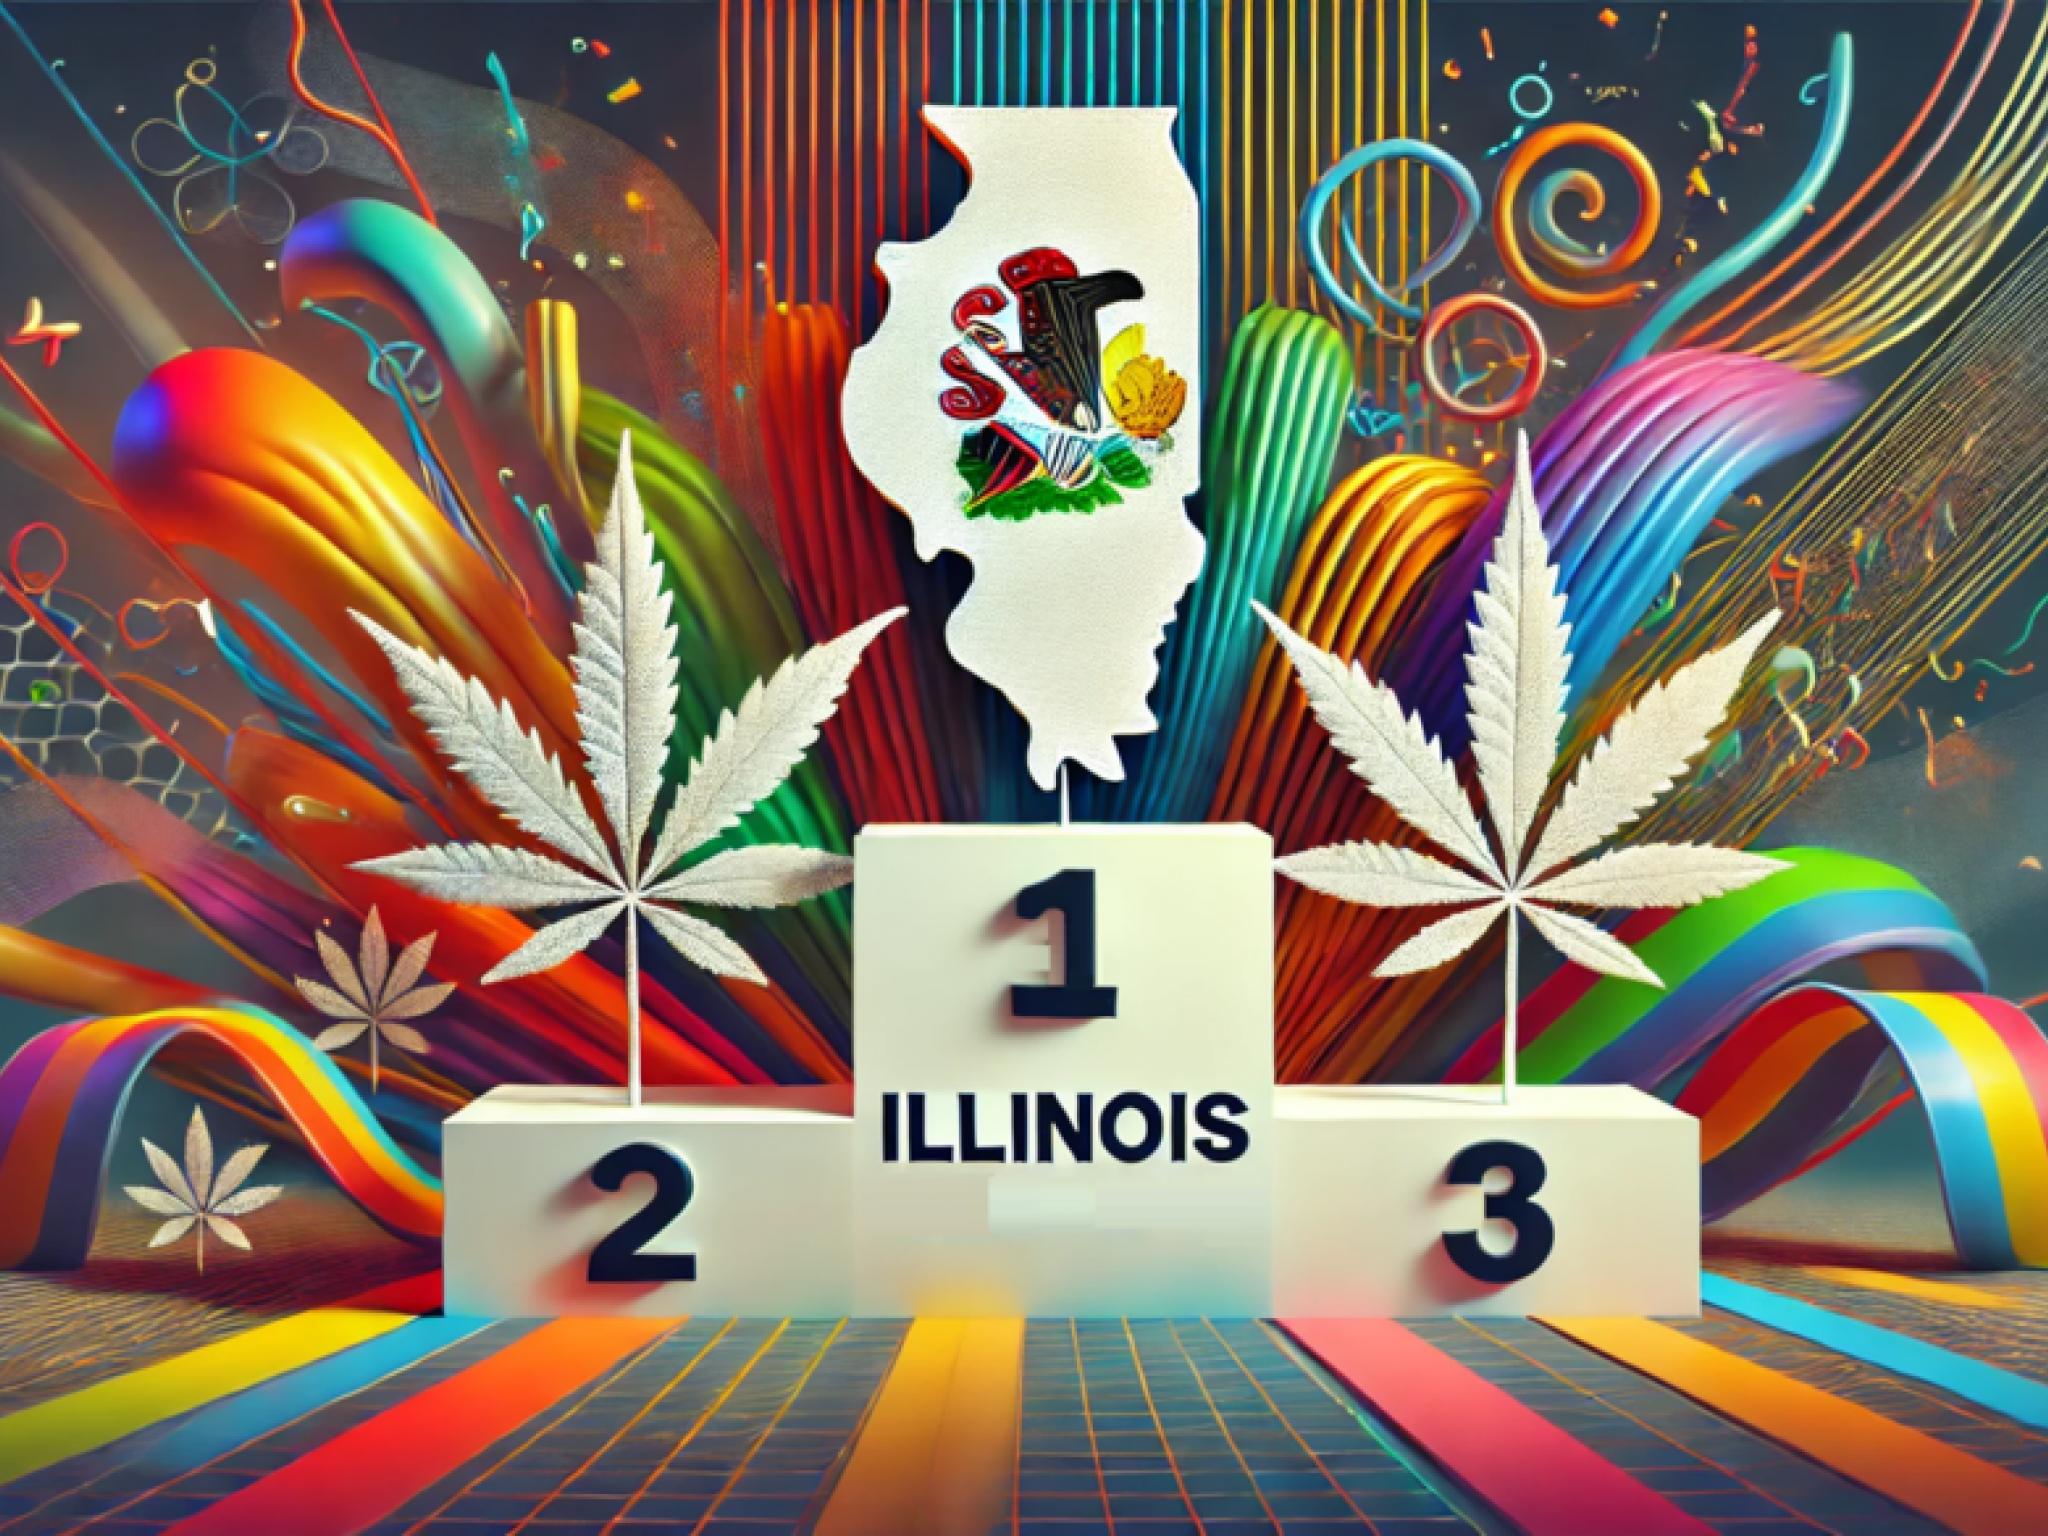  illinois-has-the-most-diverse-cannabis-business-ownership-in-the-country-opens-100th-social-equity-shop 